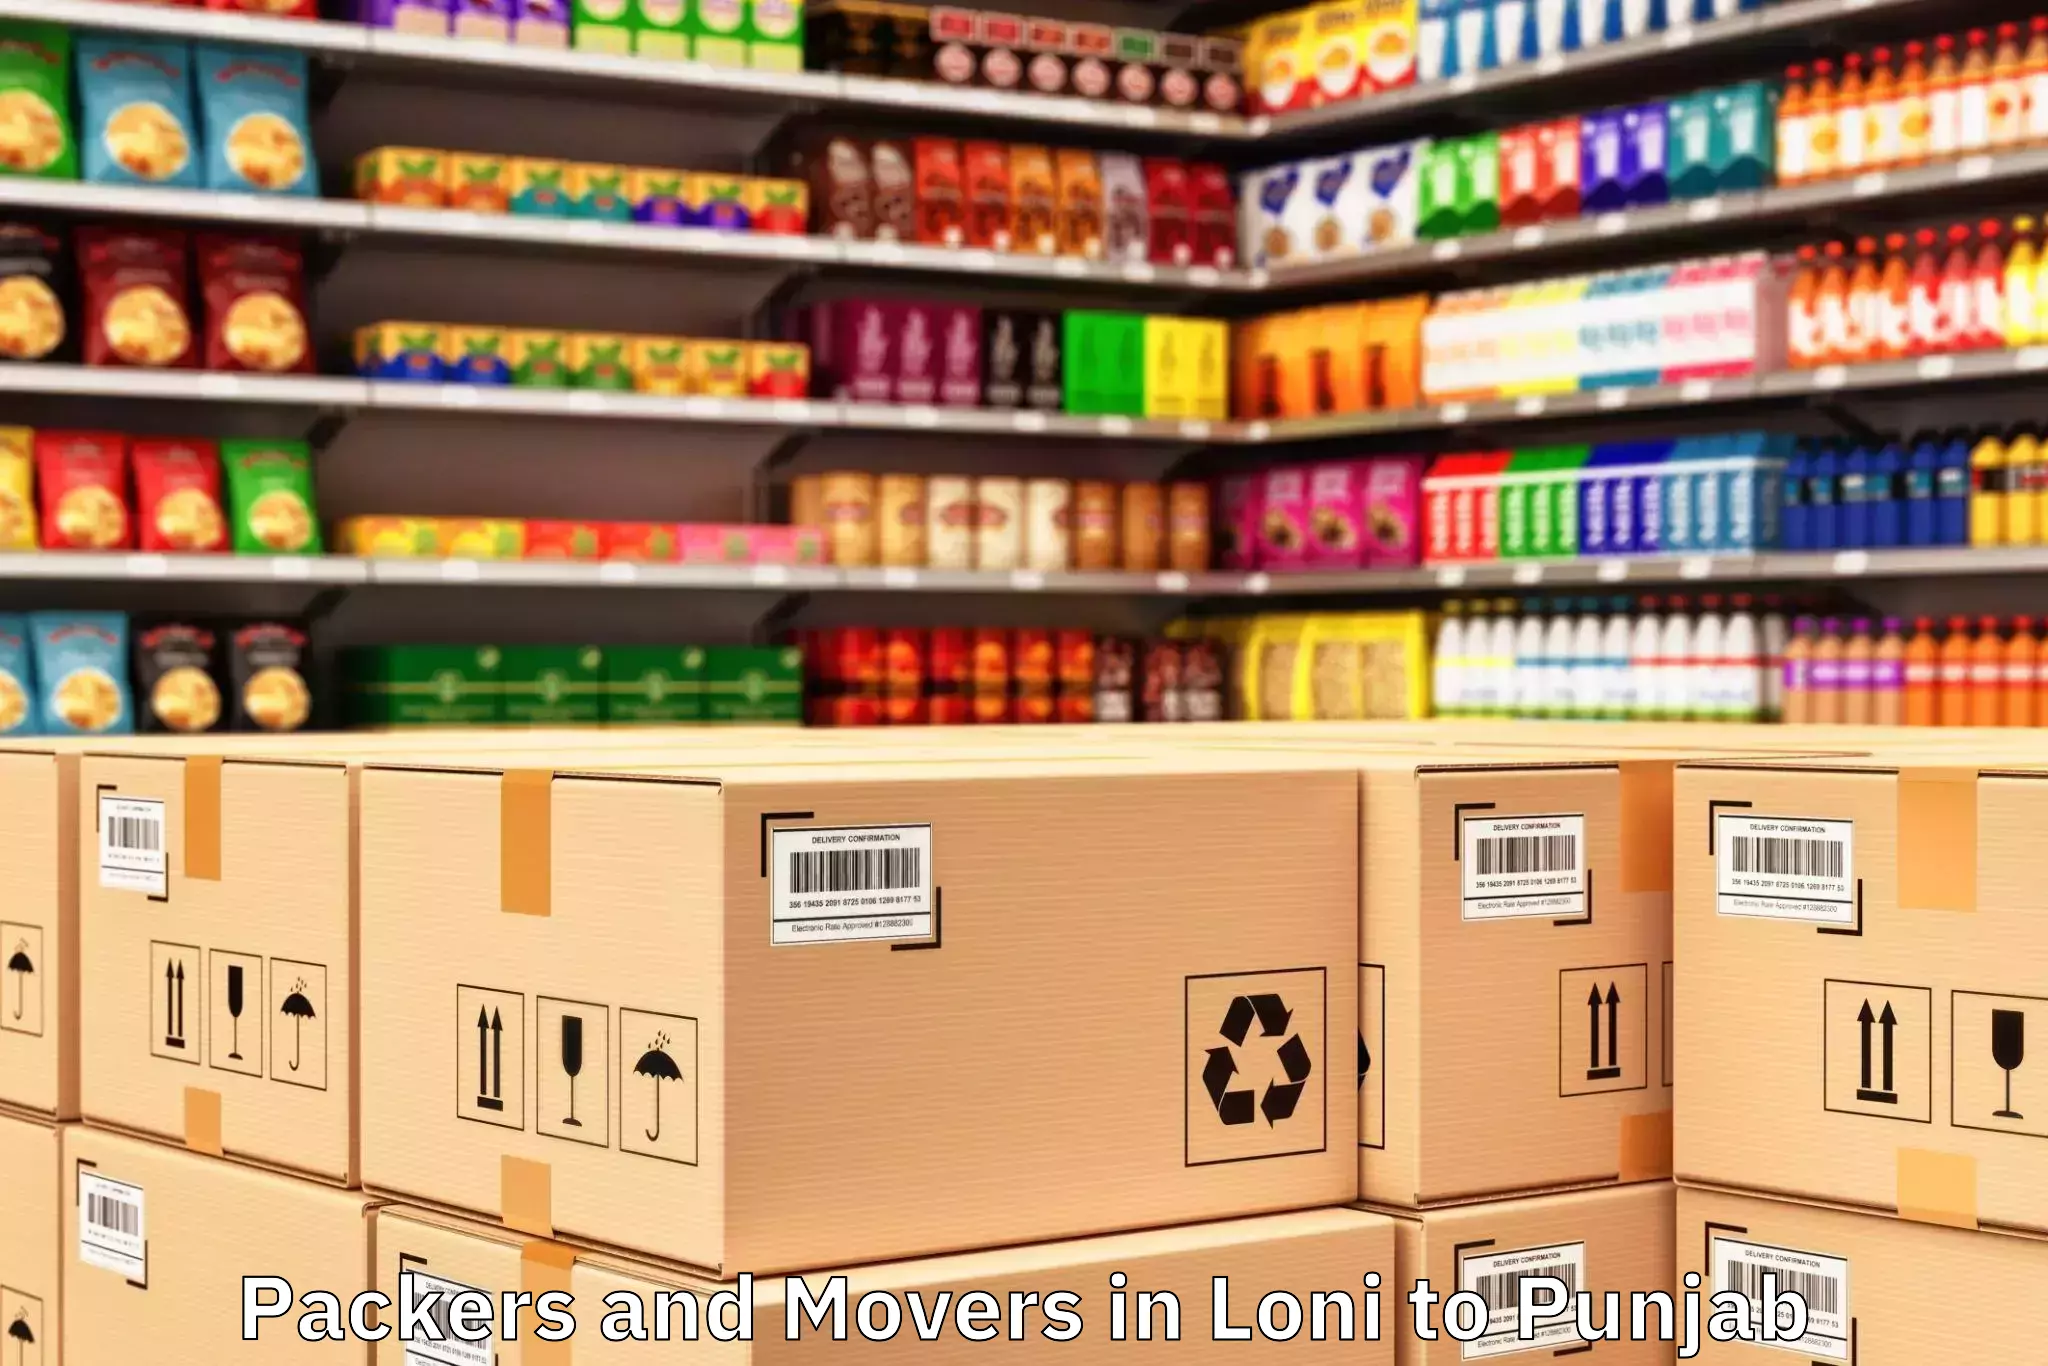 Top Loni to Vr Punjab Mall Packers And Movers Available